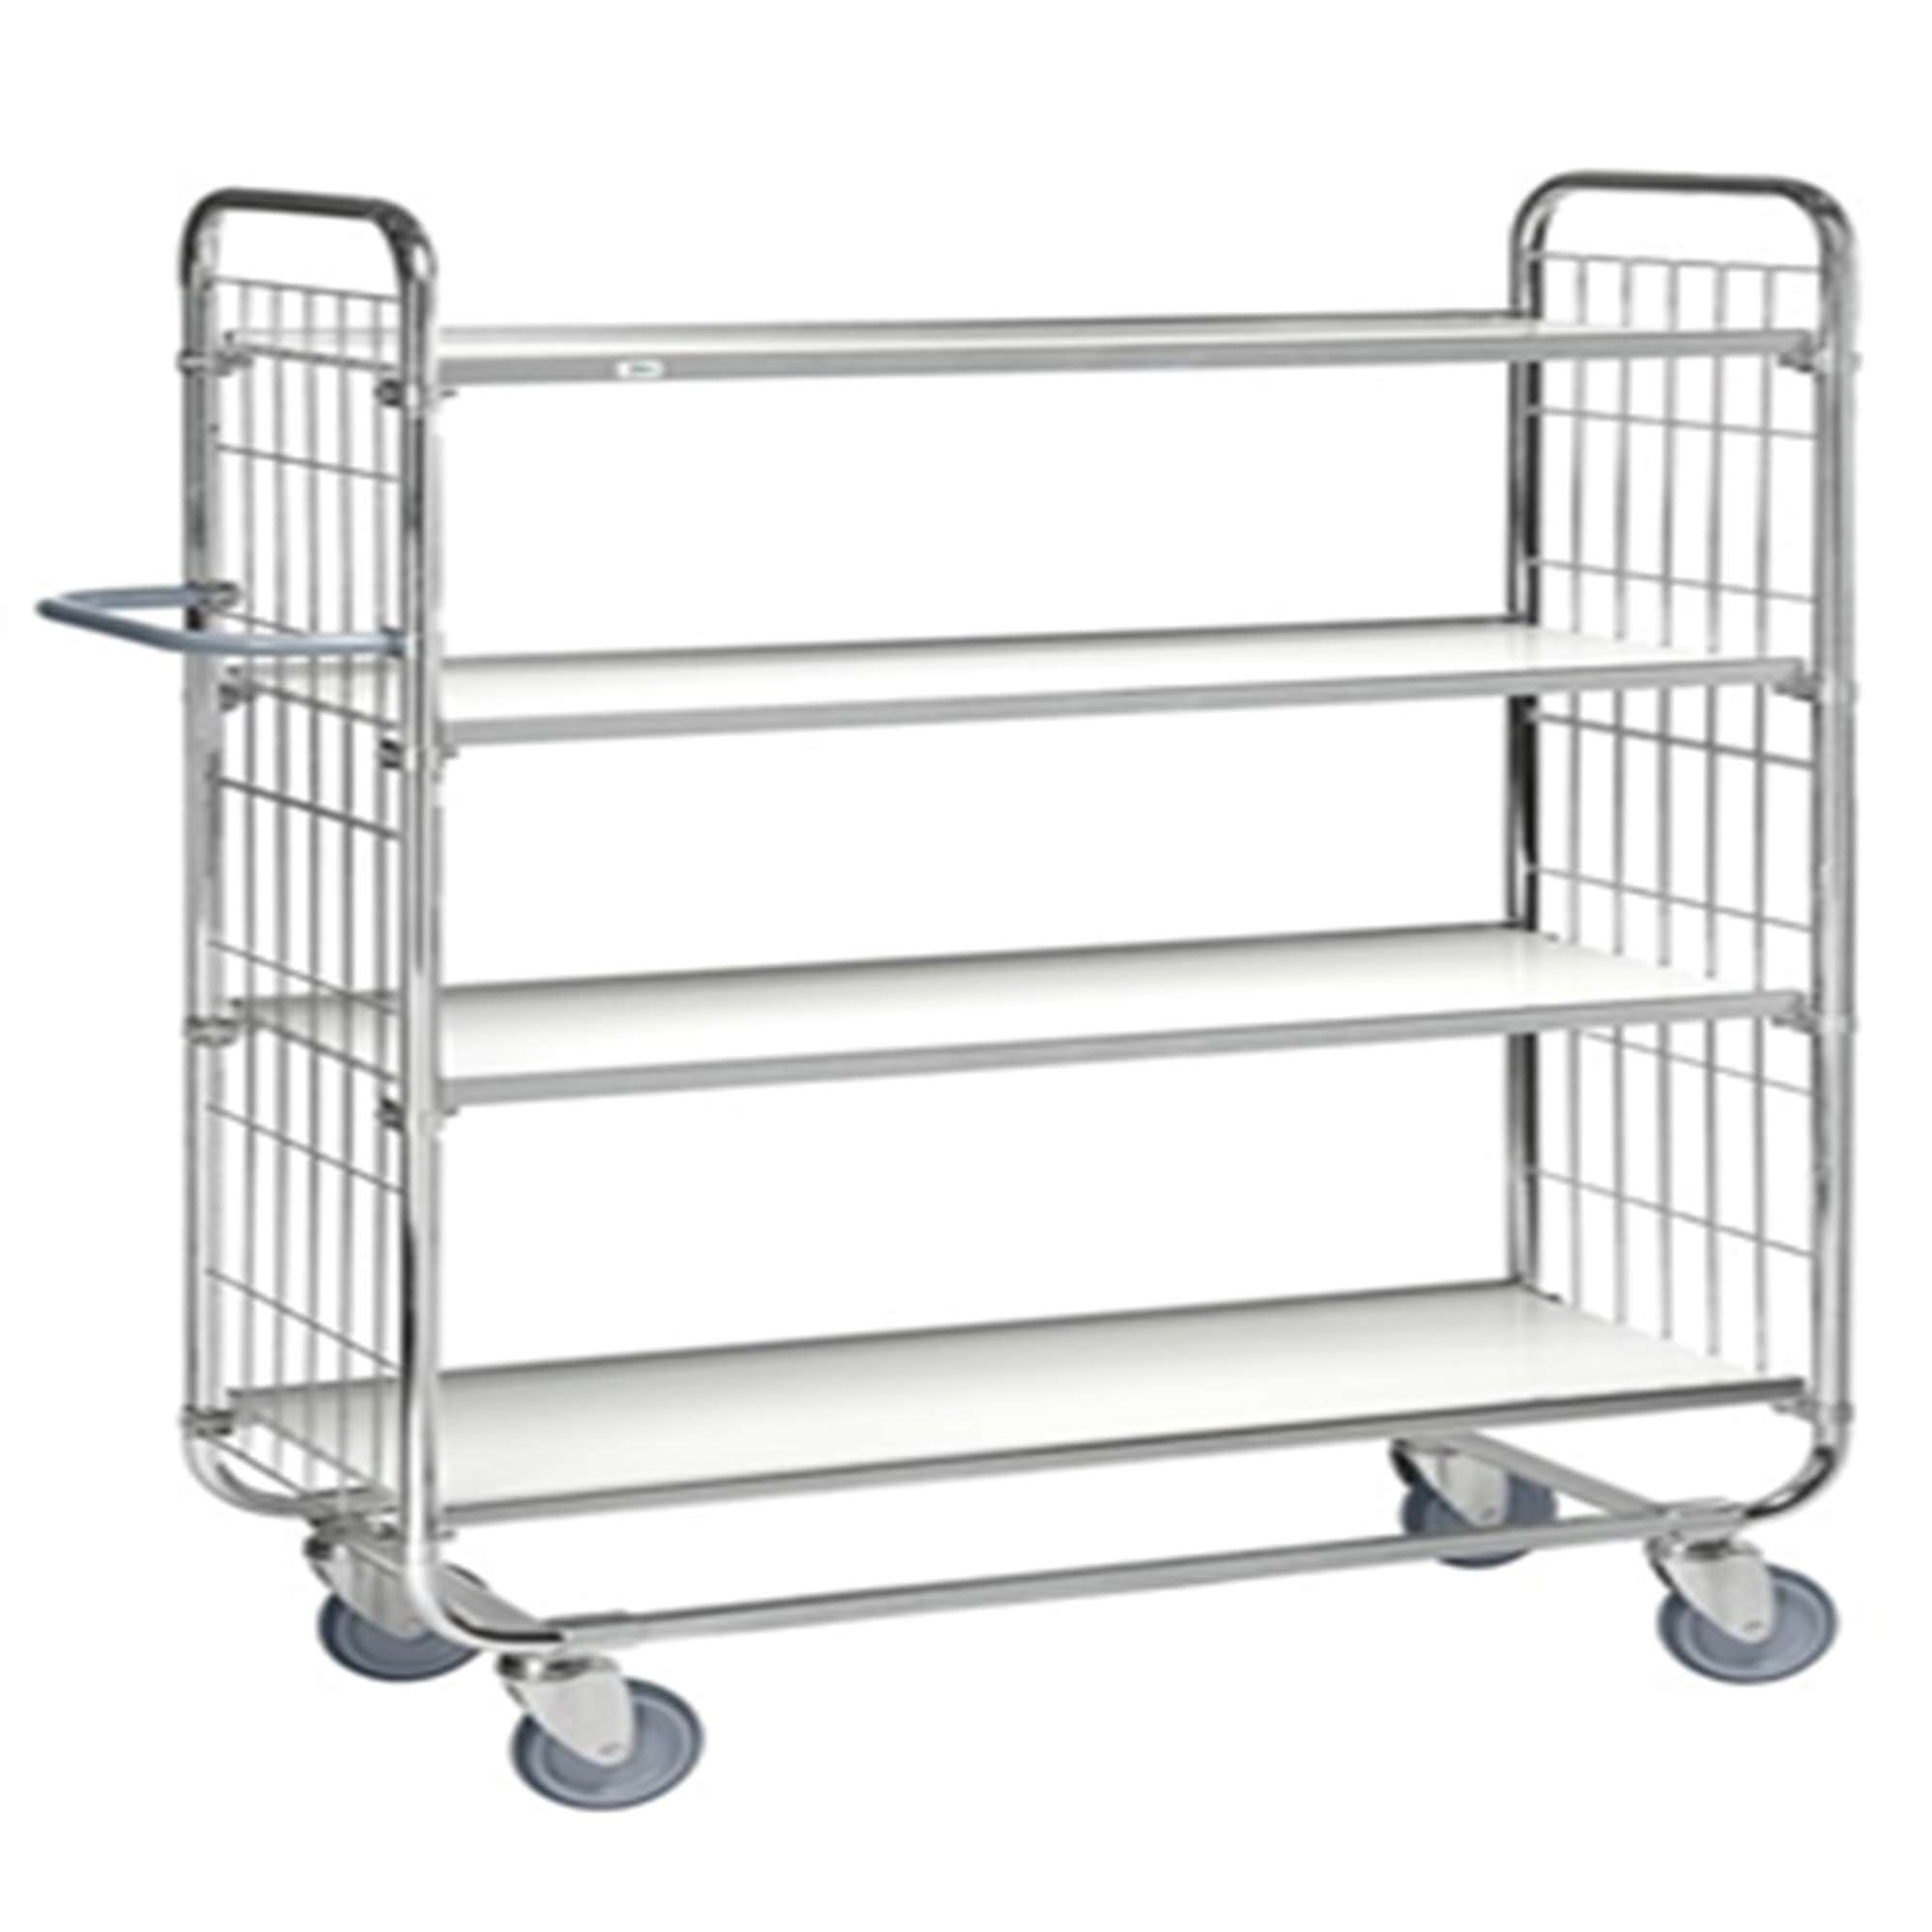 Flexible shelf trolley with laminate adjustable shelves LxWxH (mm) 1195x470x1590